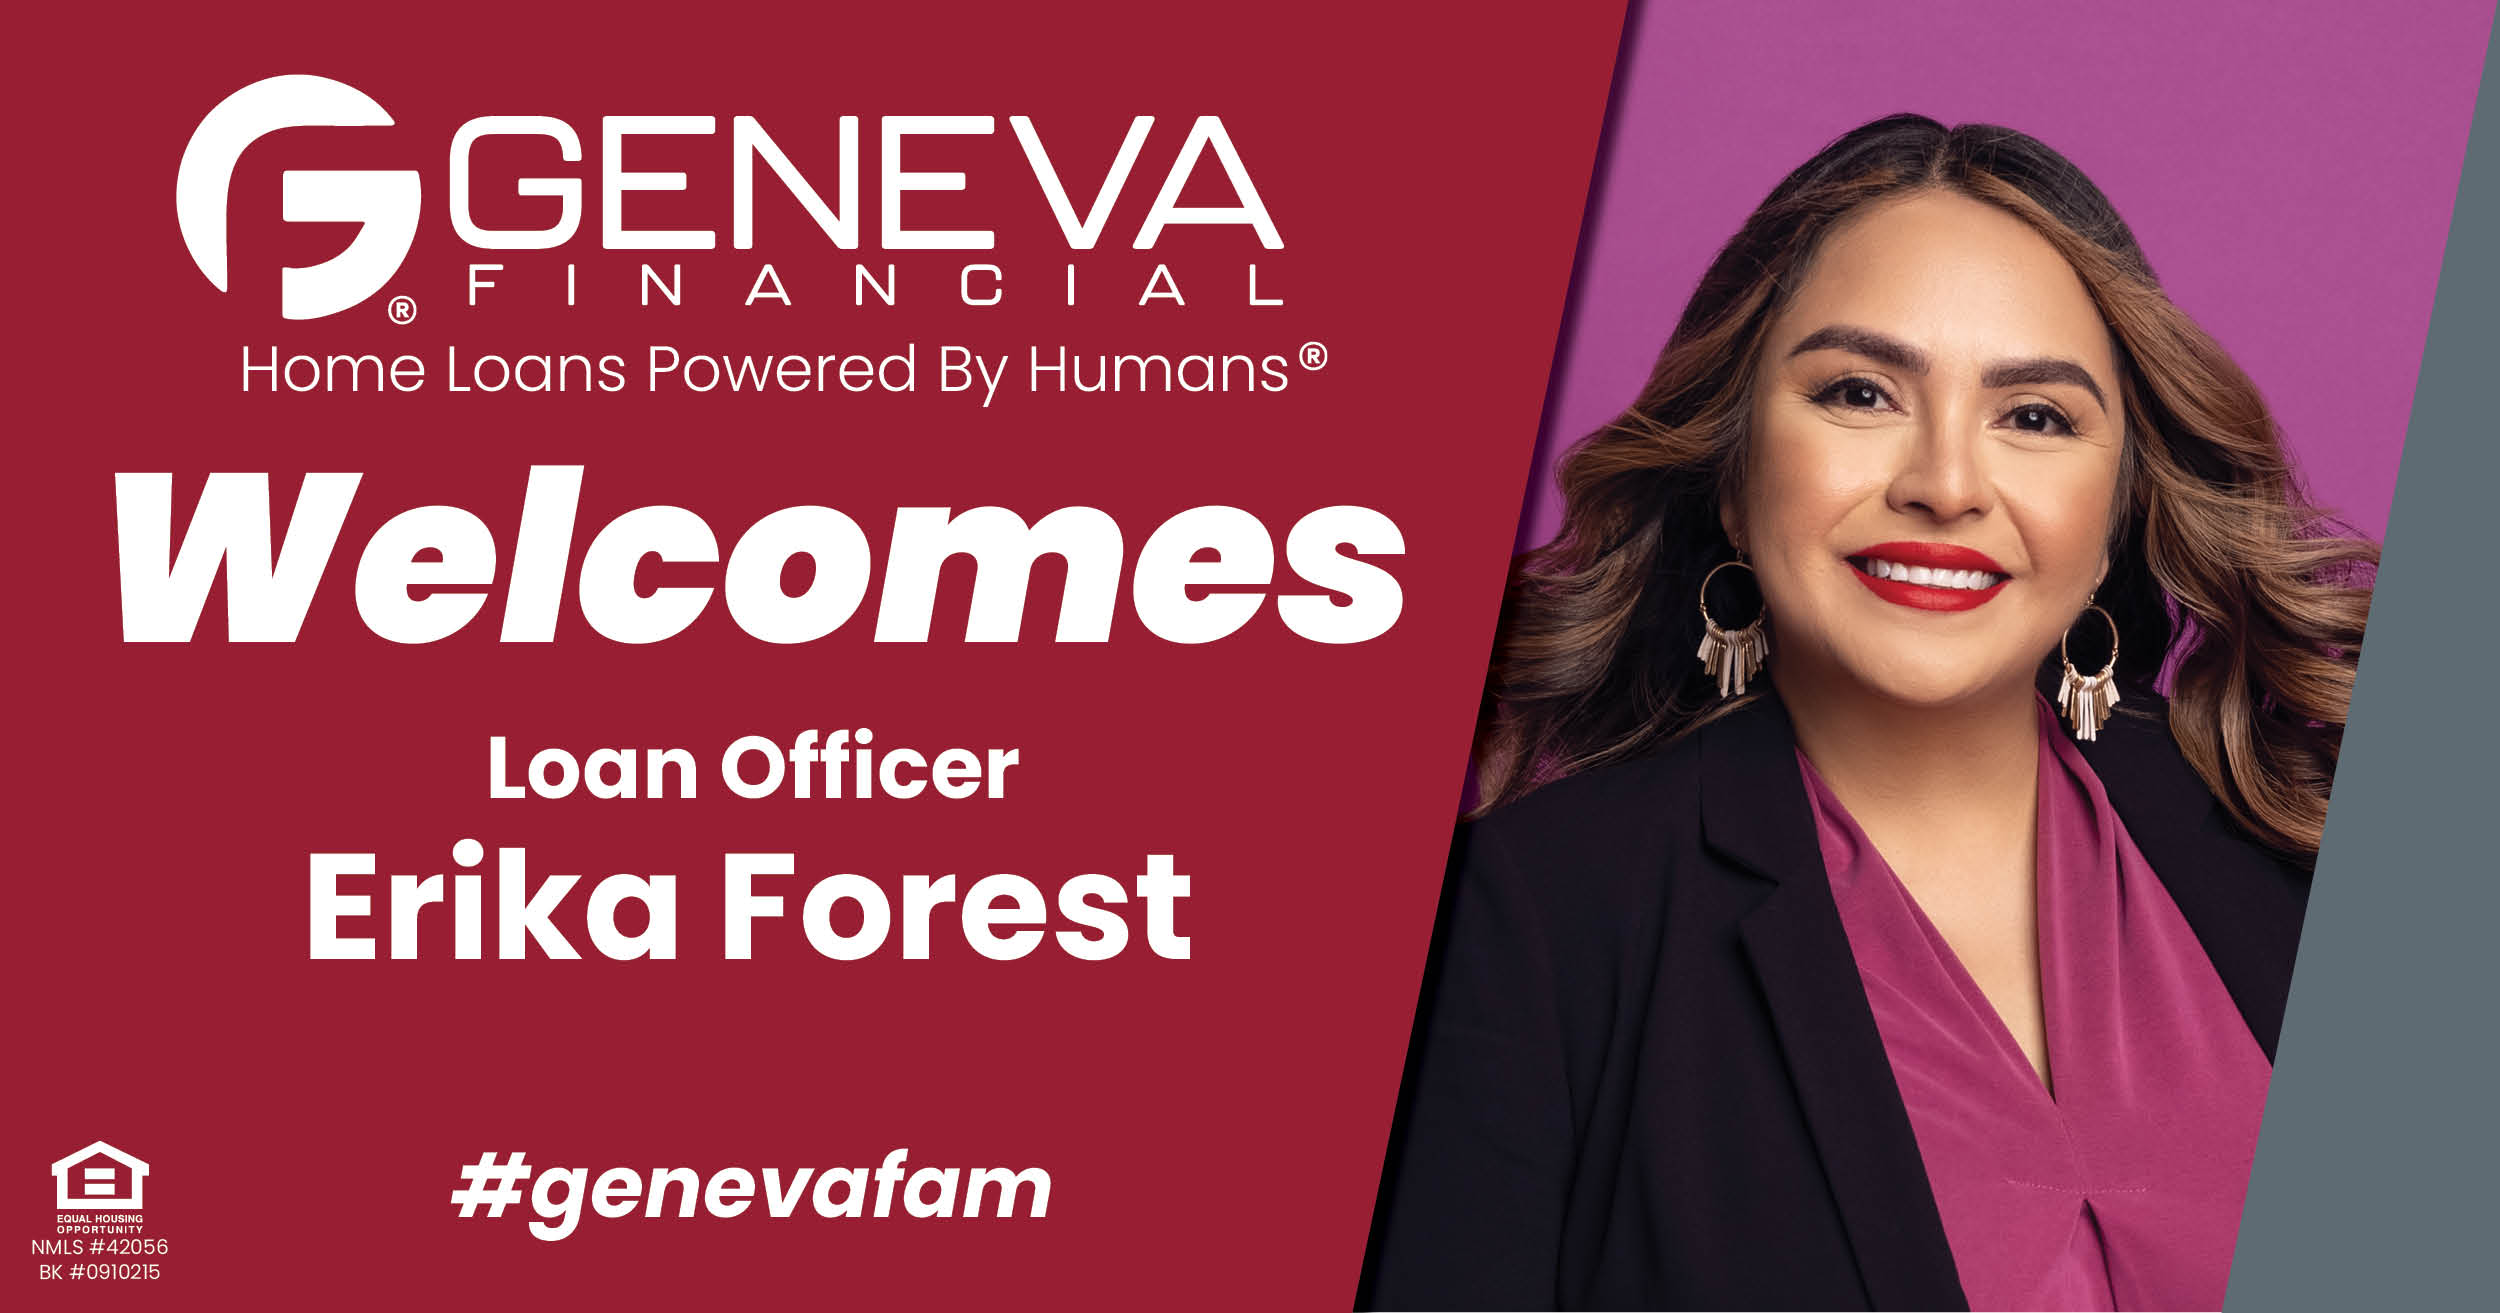 Geneva Financial Welcomes New Loan Officer Erika Forest to Siloam Springs, Arkansas – Home Loans Powered by Humans®.